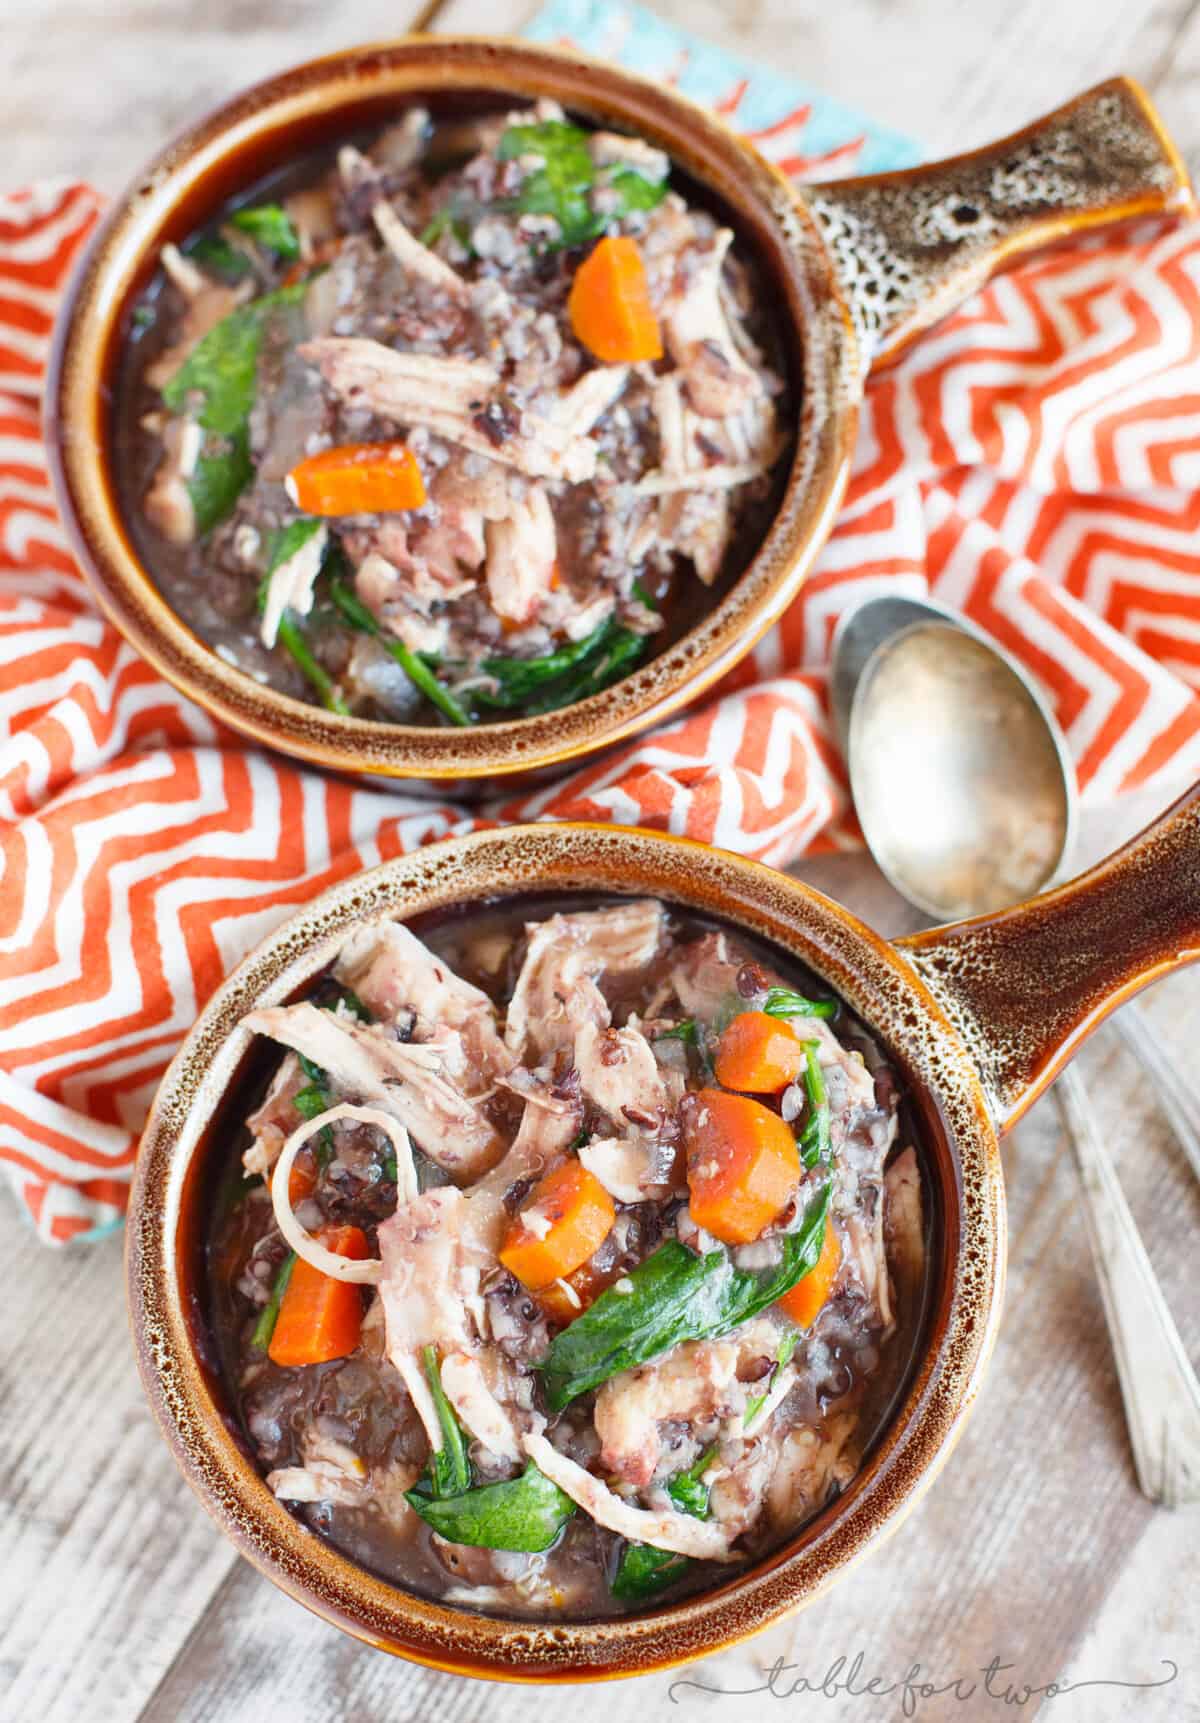 A delicious hearty and comforting slow cooker wild rice stew made with leftover Thanksgiving turkey or any other extra meat that you have leftover! It's a great way to incorporate leftovers in a different way!